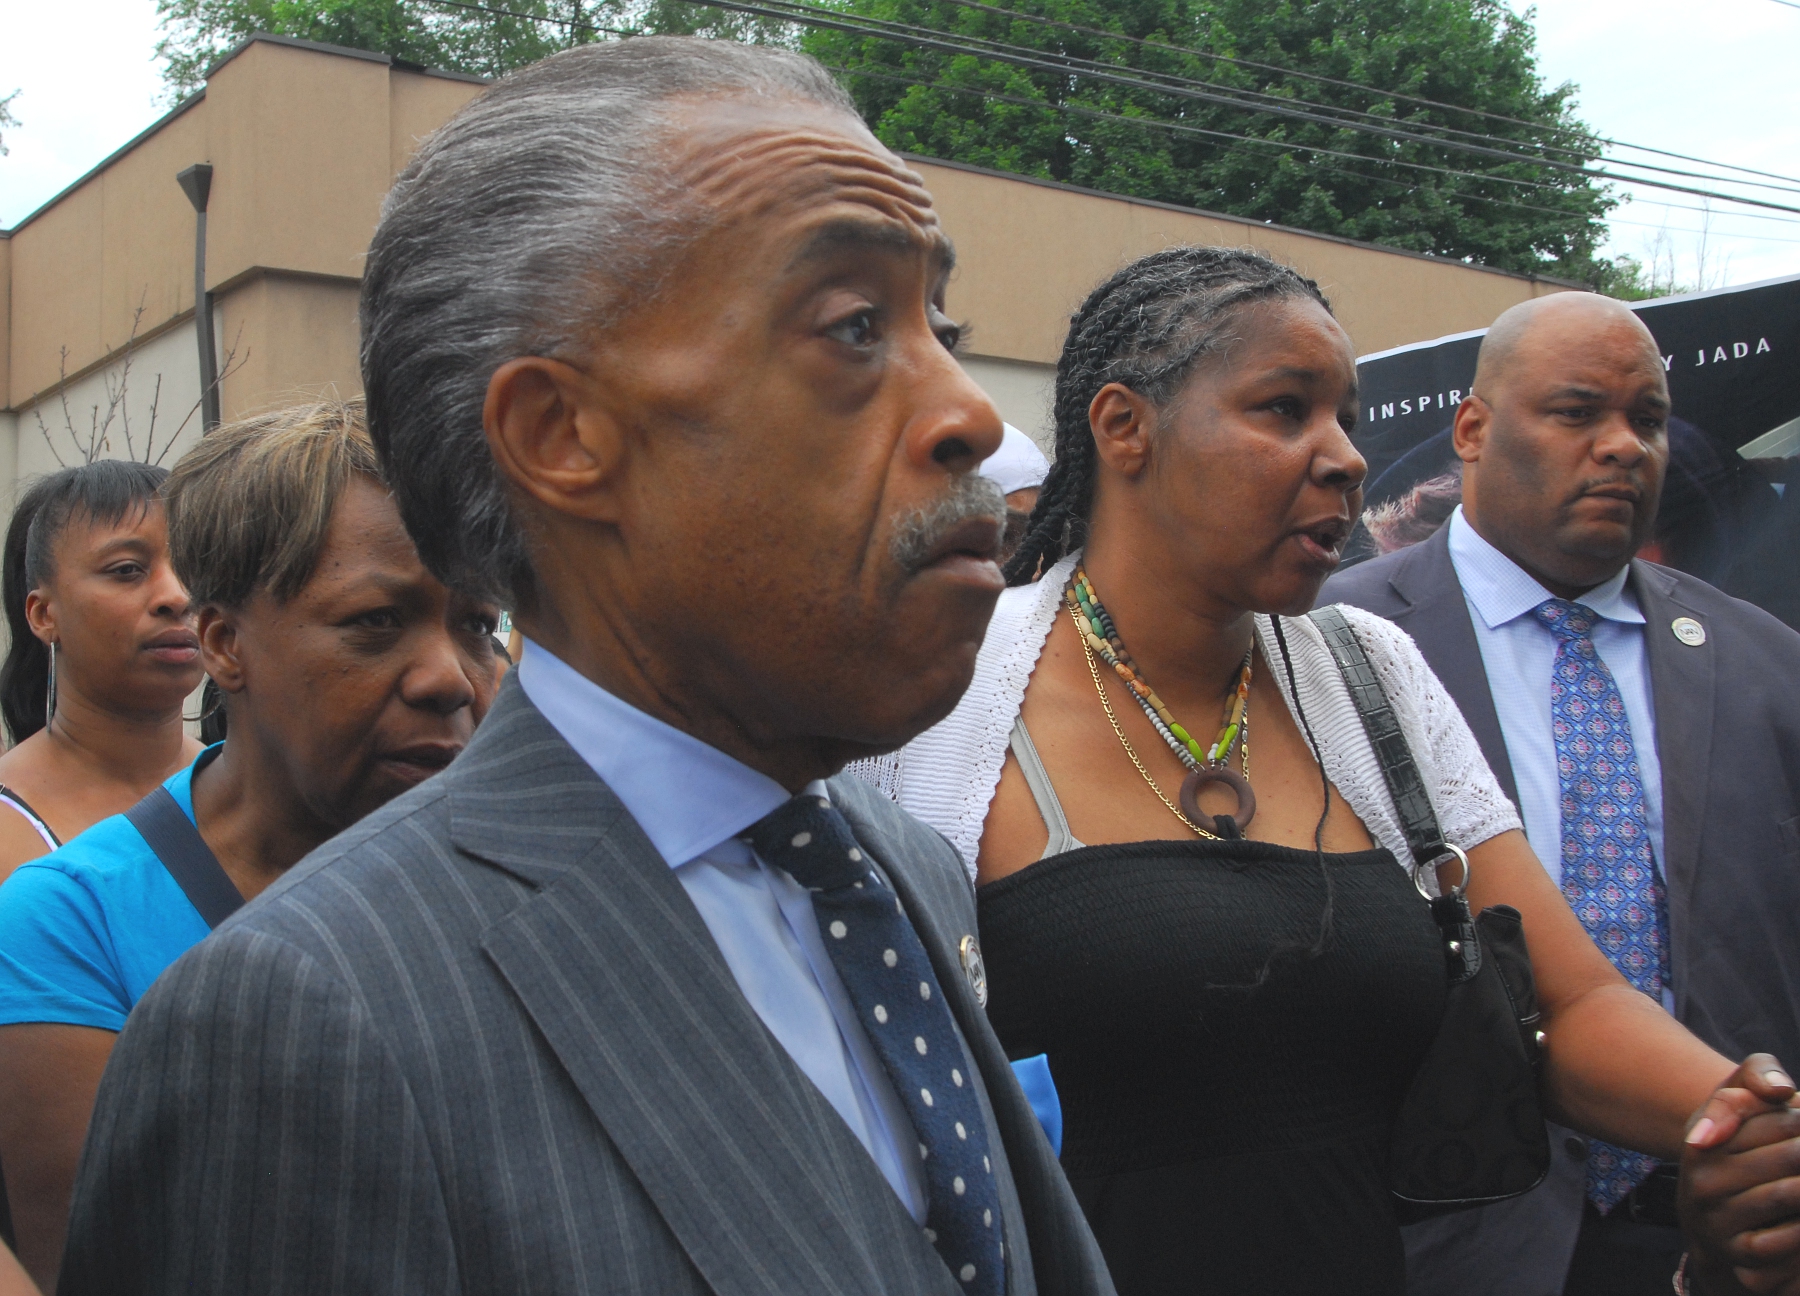 Photo of Rev. Al Sharpton of the National Action Network with Esaw Garner, widow of Eric Garner, at a 2014 protest in the Staten Island neighborhood where Eric Garner died while in police custody.